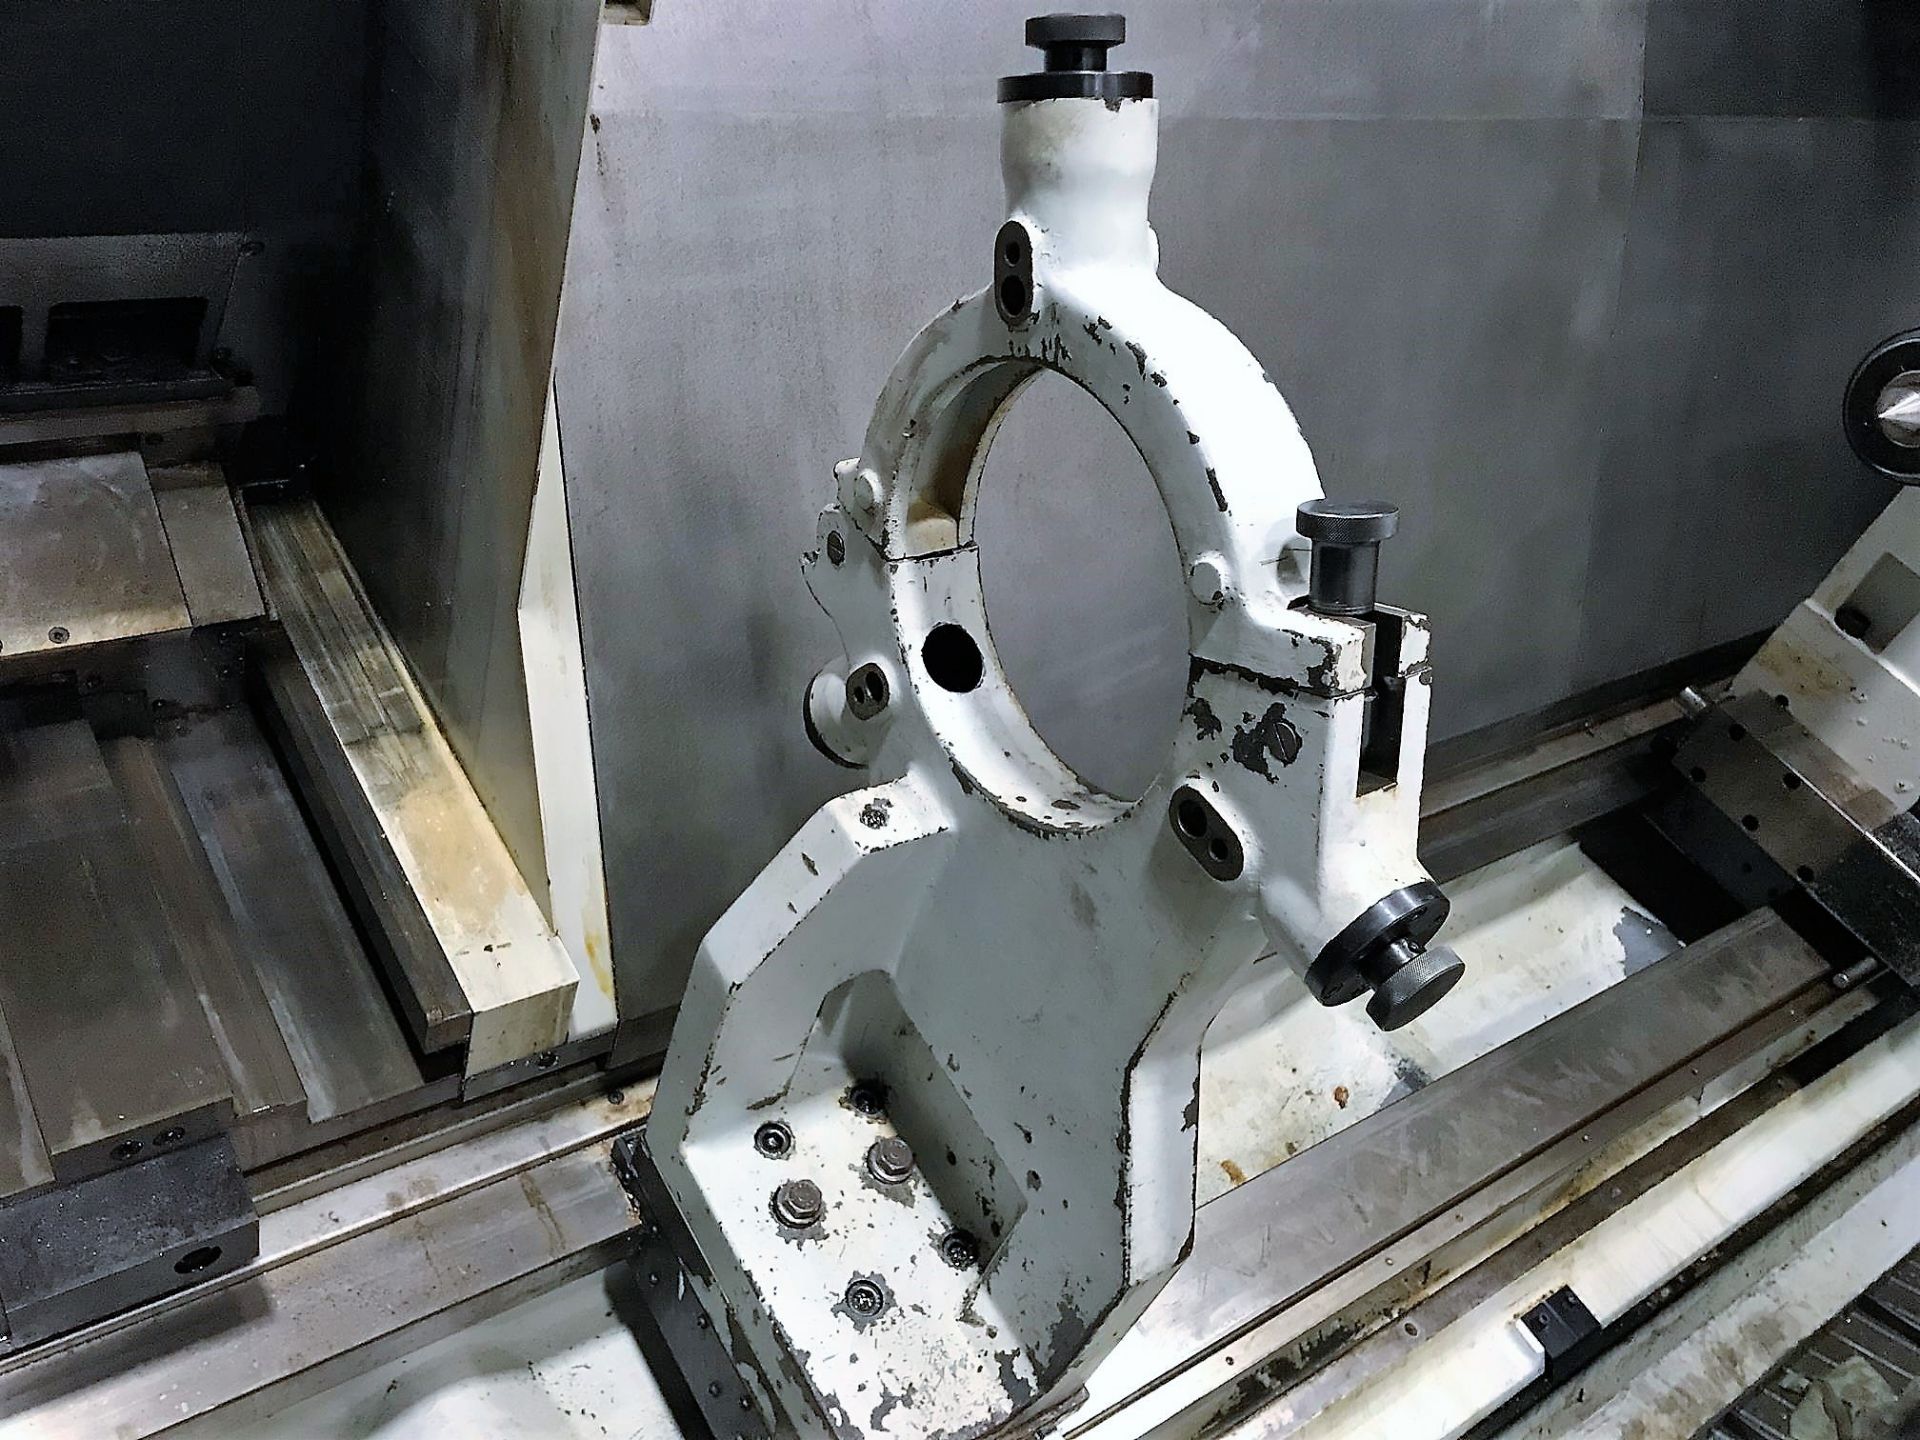 16.5" x 120" Mori Seiki NL3000Y/3000 CNC Turning Center Lathe w/Milling & Y-Axis, S/N 11986, New 201 - Image 8 of 17